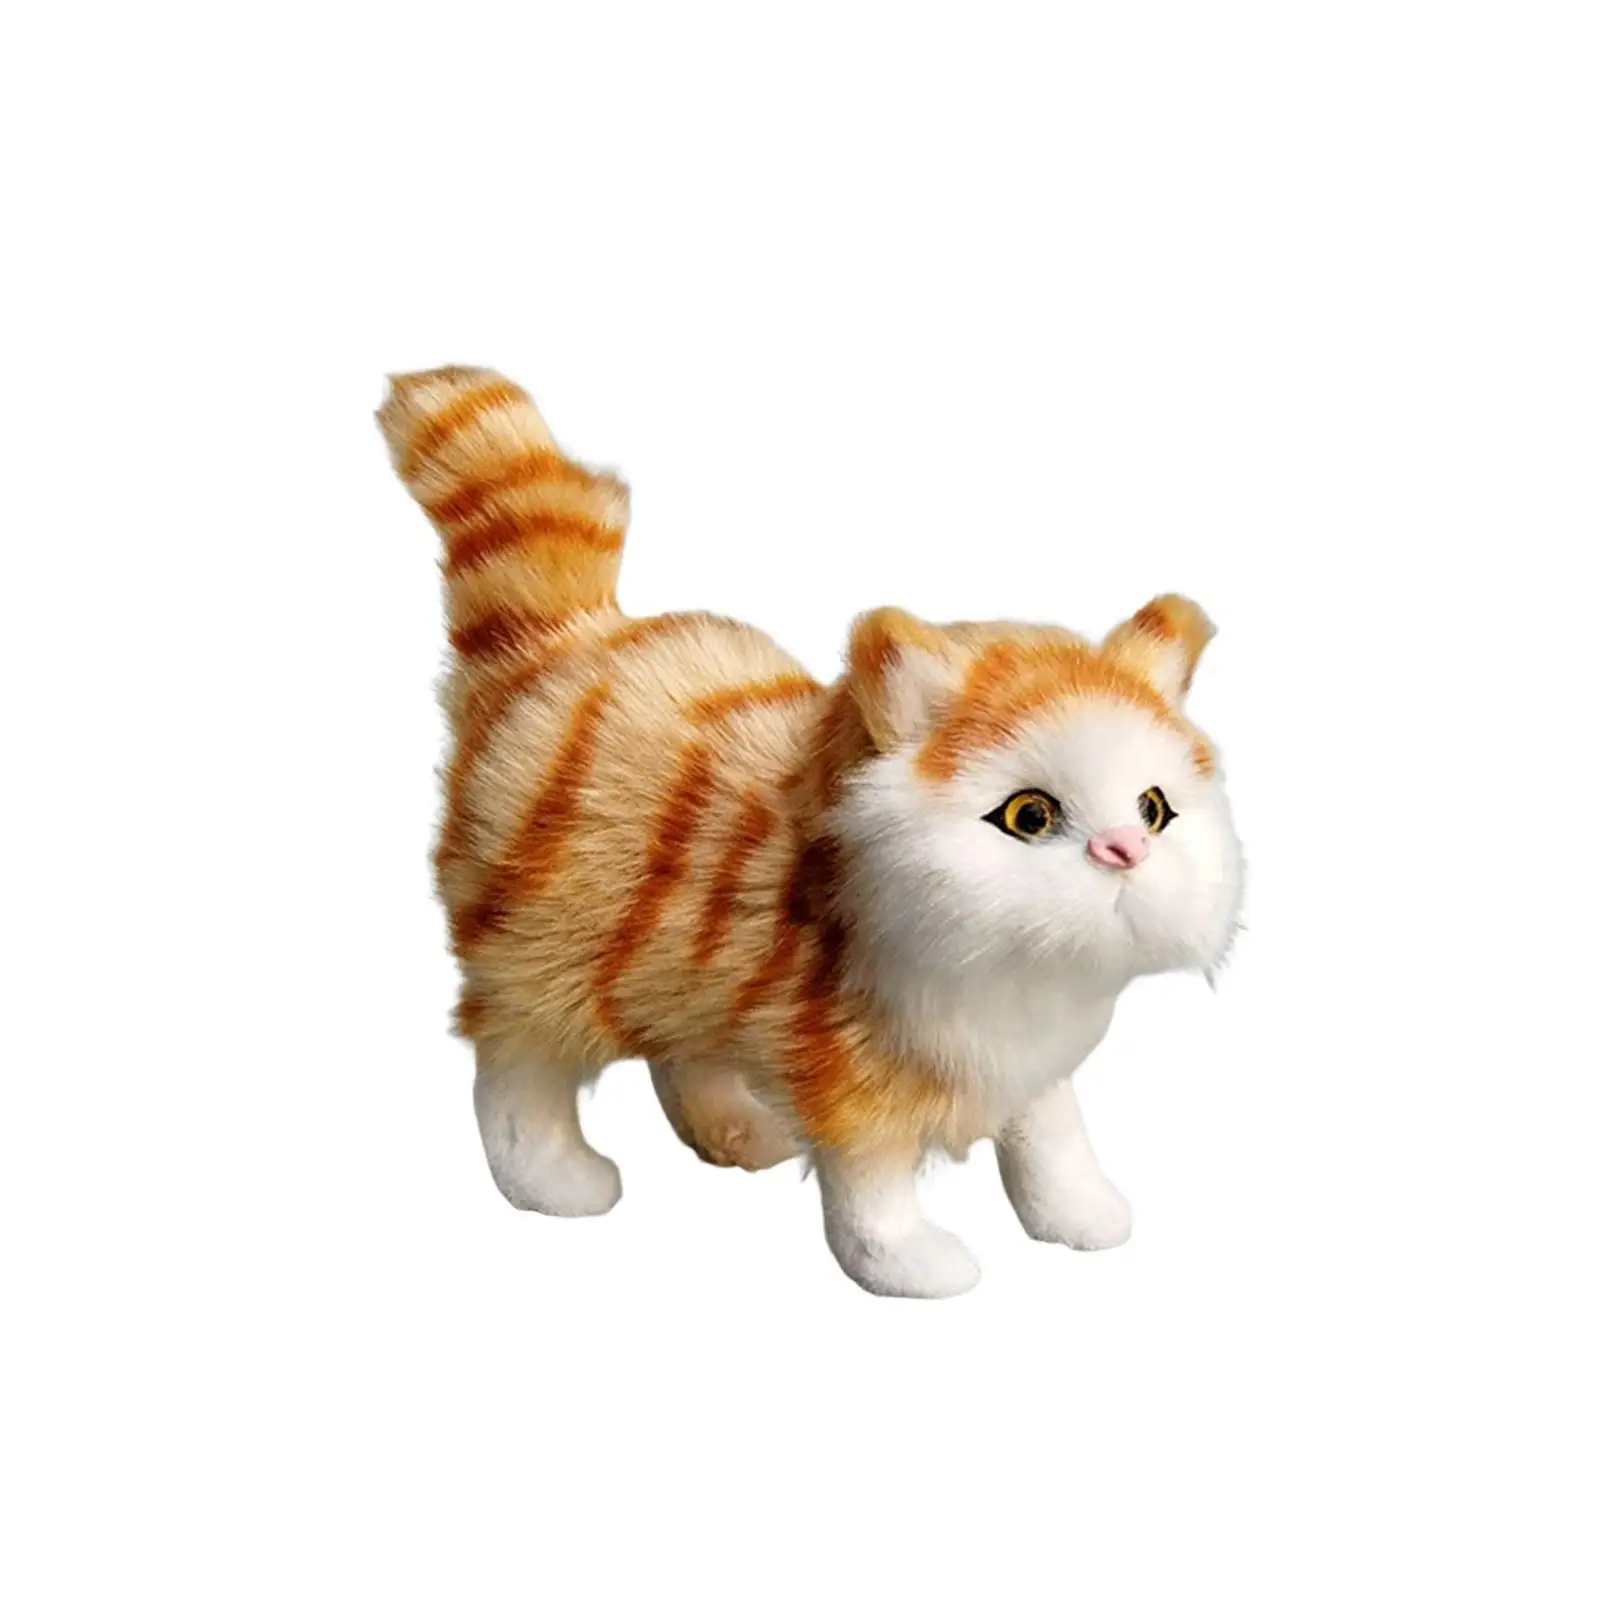 Miniature Simulation Cat Figures Realistic Kitten Figurines Toy for Tabletop